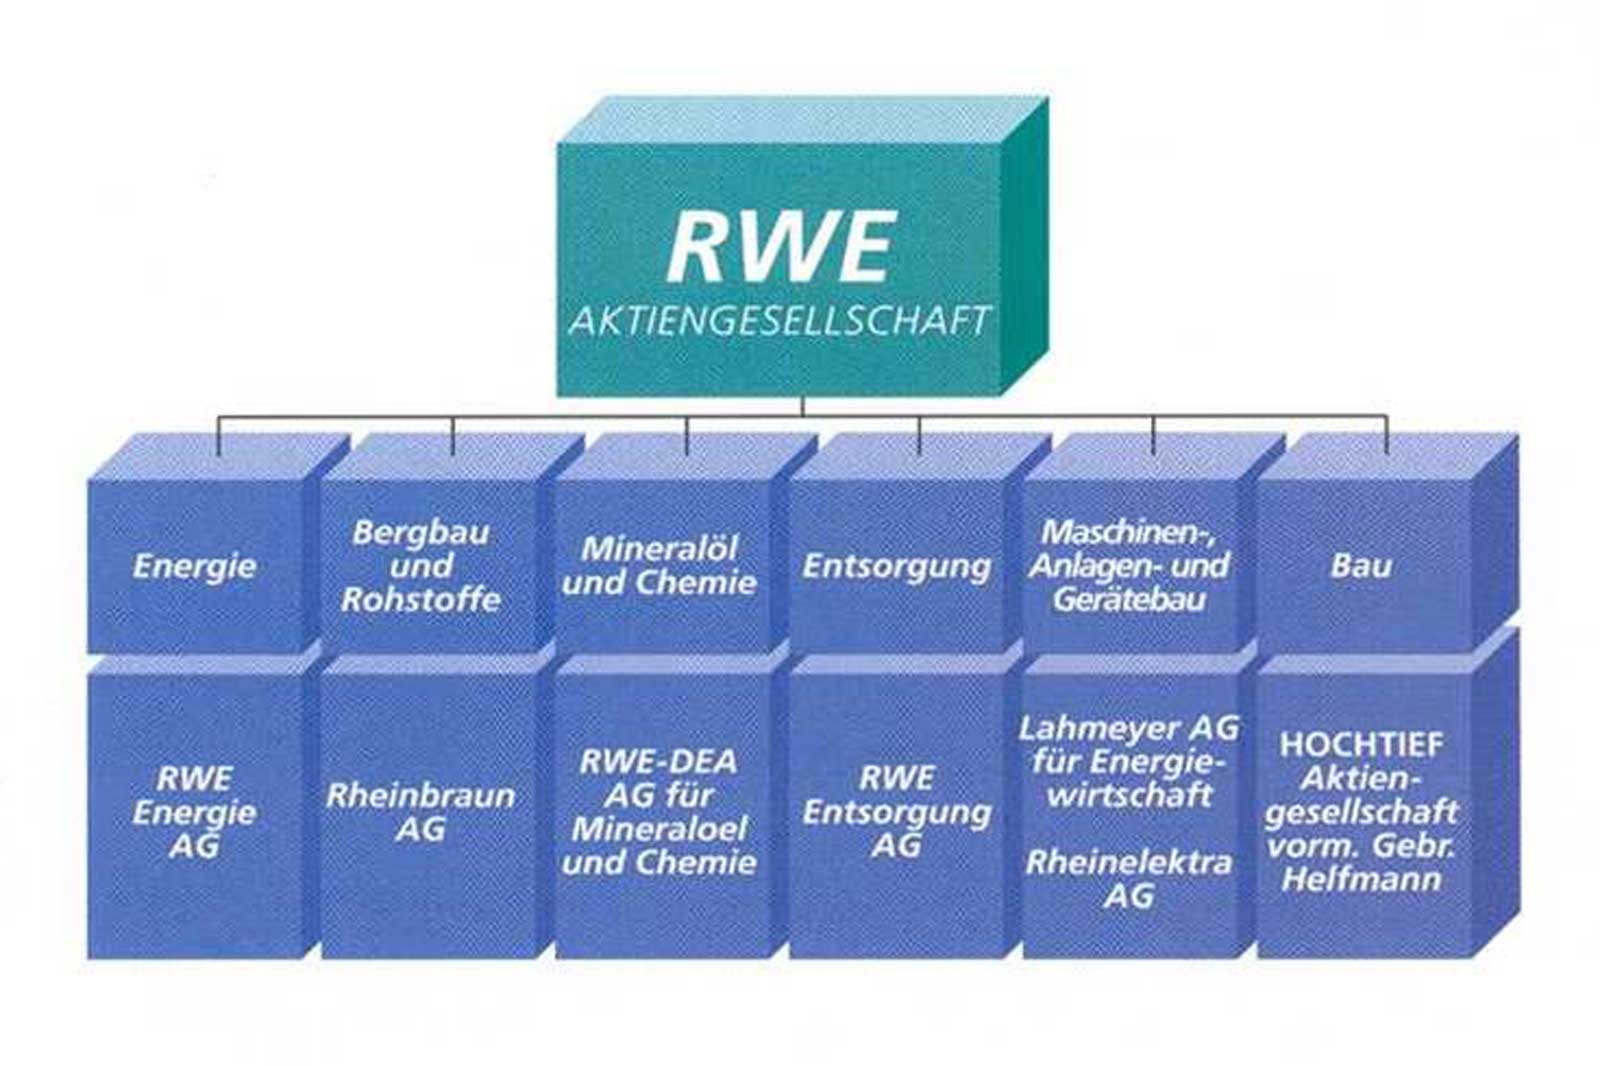 New structure of the RWE Group, 1990